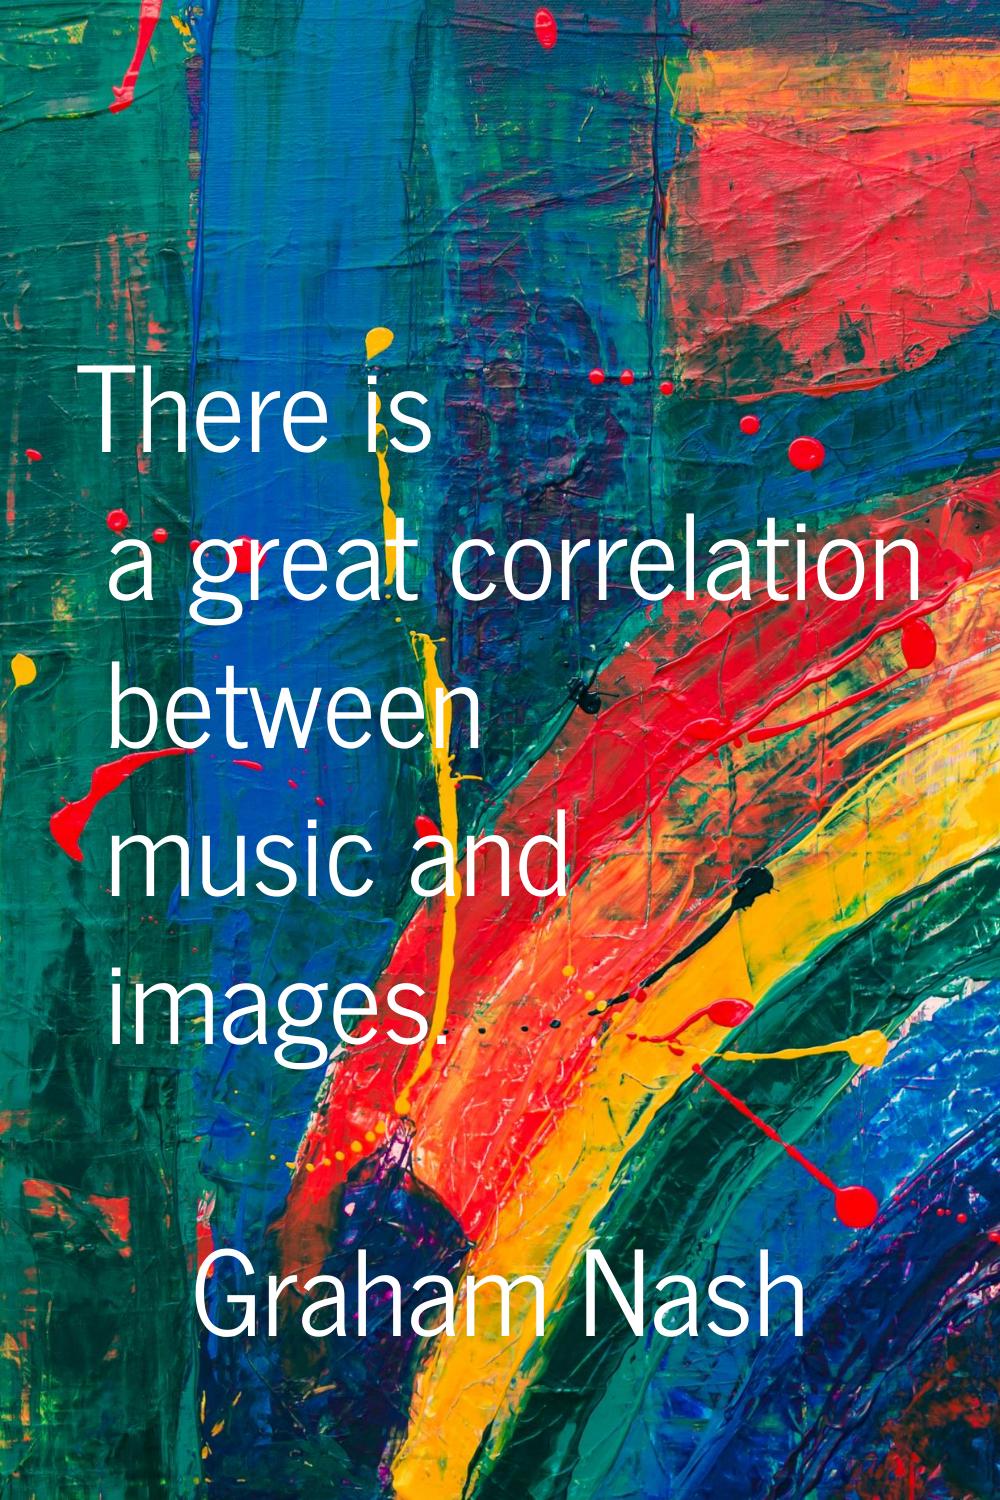 There is a great correlation between music and images.